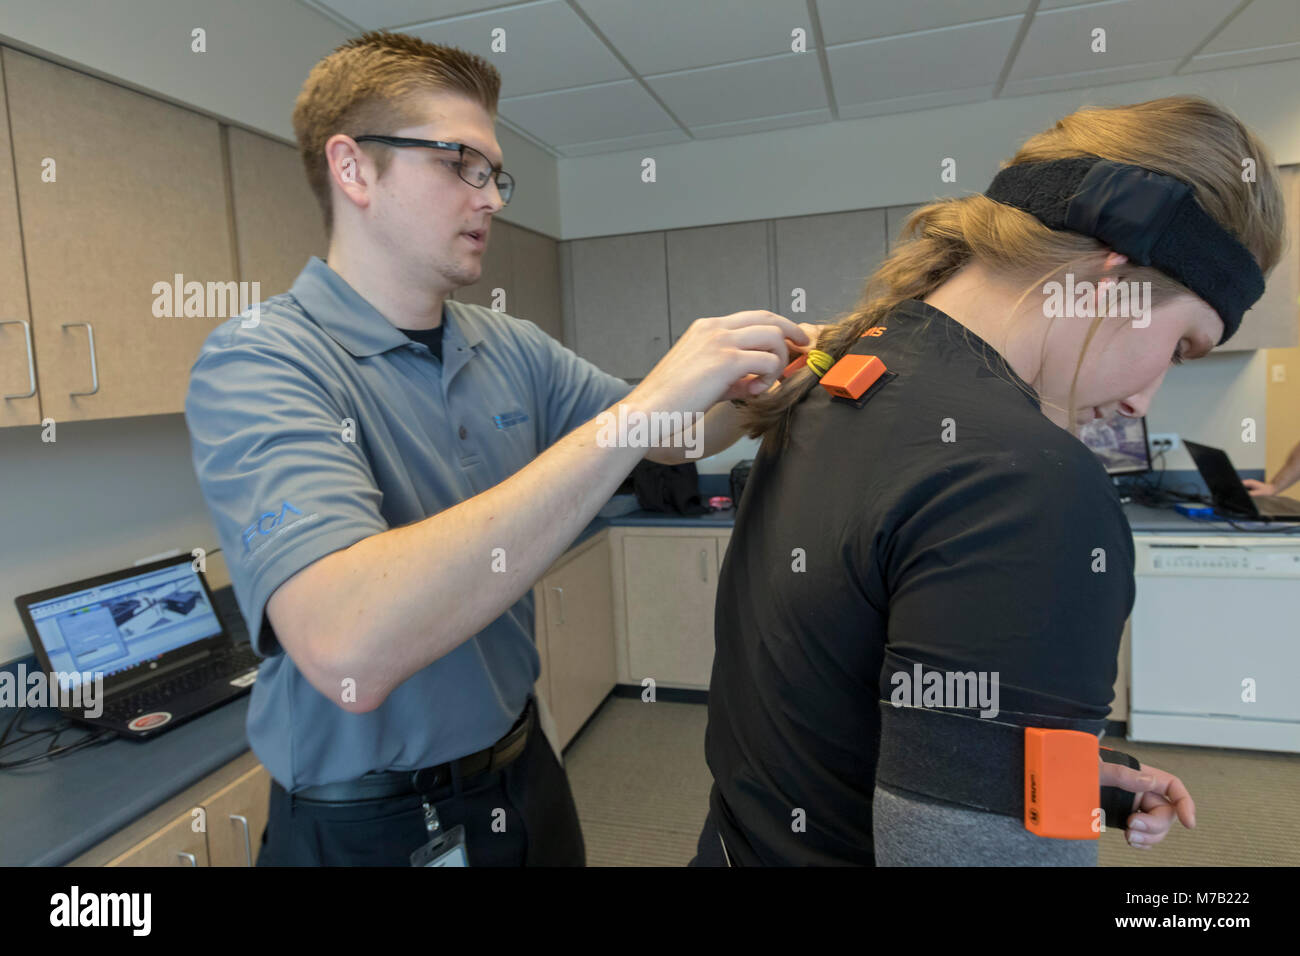 Auburn Hills, Michigan USA - 9 March 2018 - Bradley Roettger adjusts sensors on a motion suit worn by Taylor VanDyke at Fiat Chrysler Automobiles. The sensors translate movements onto a virtual reality computer screen. FCA engineers use the equipment to determine the best methods for assembling cars that are still in the design stage. Credit: Jim West/Alamy Live News Stock Photo